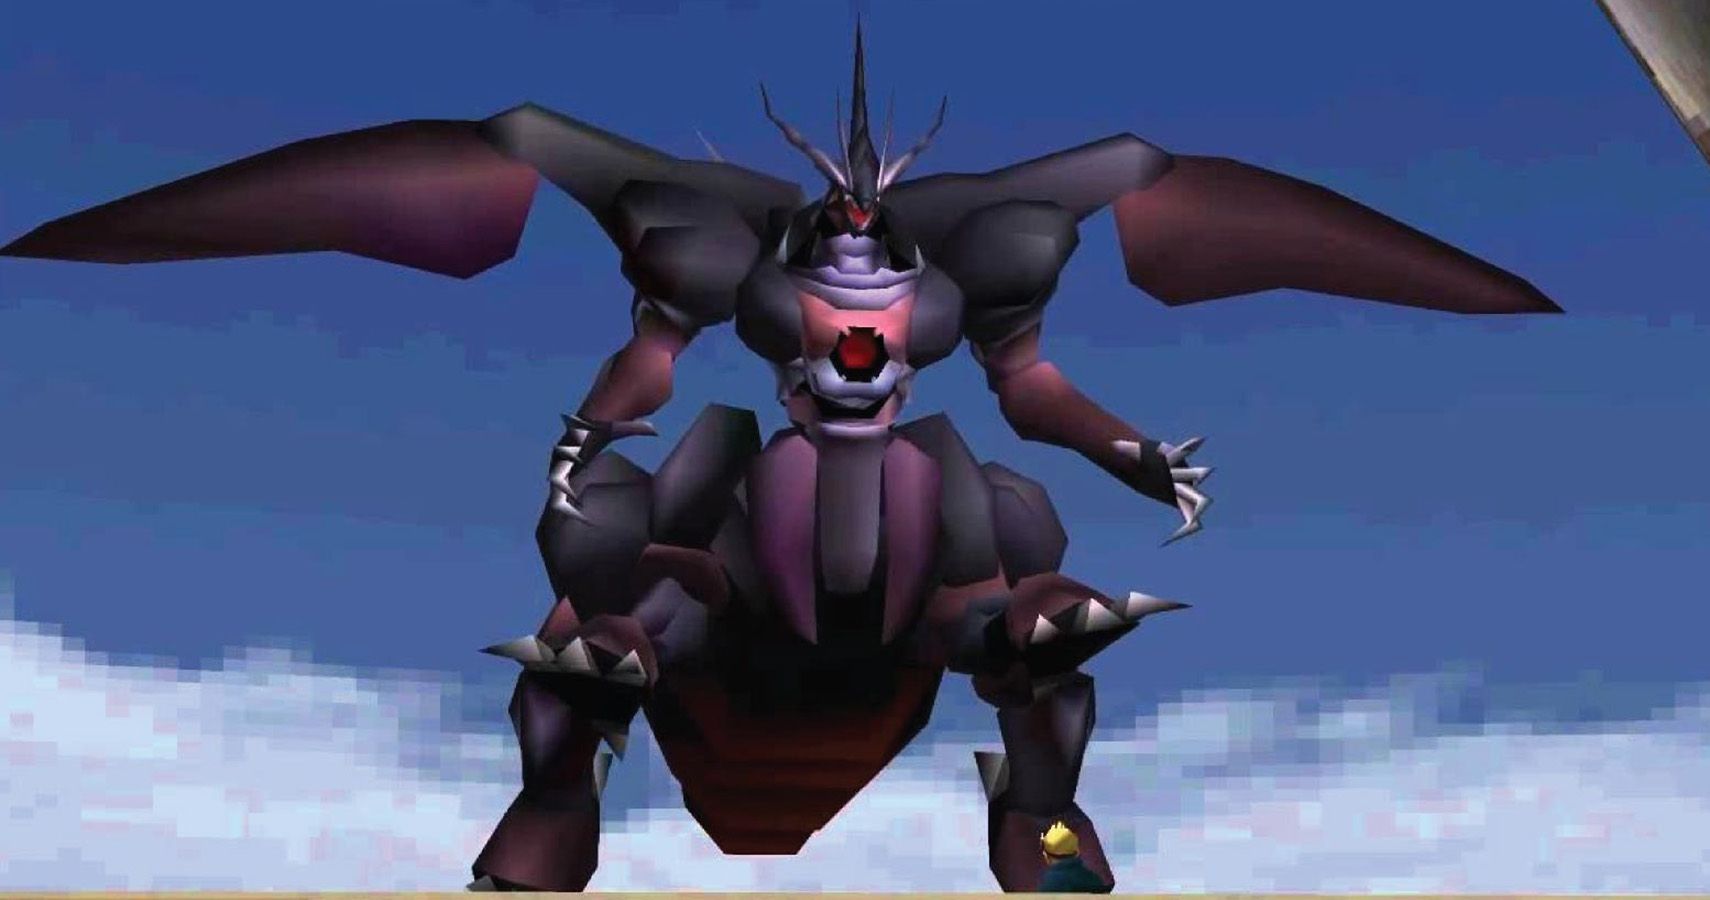 Ultimate weapon in Final Fantasy 7